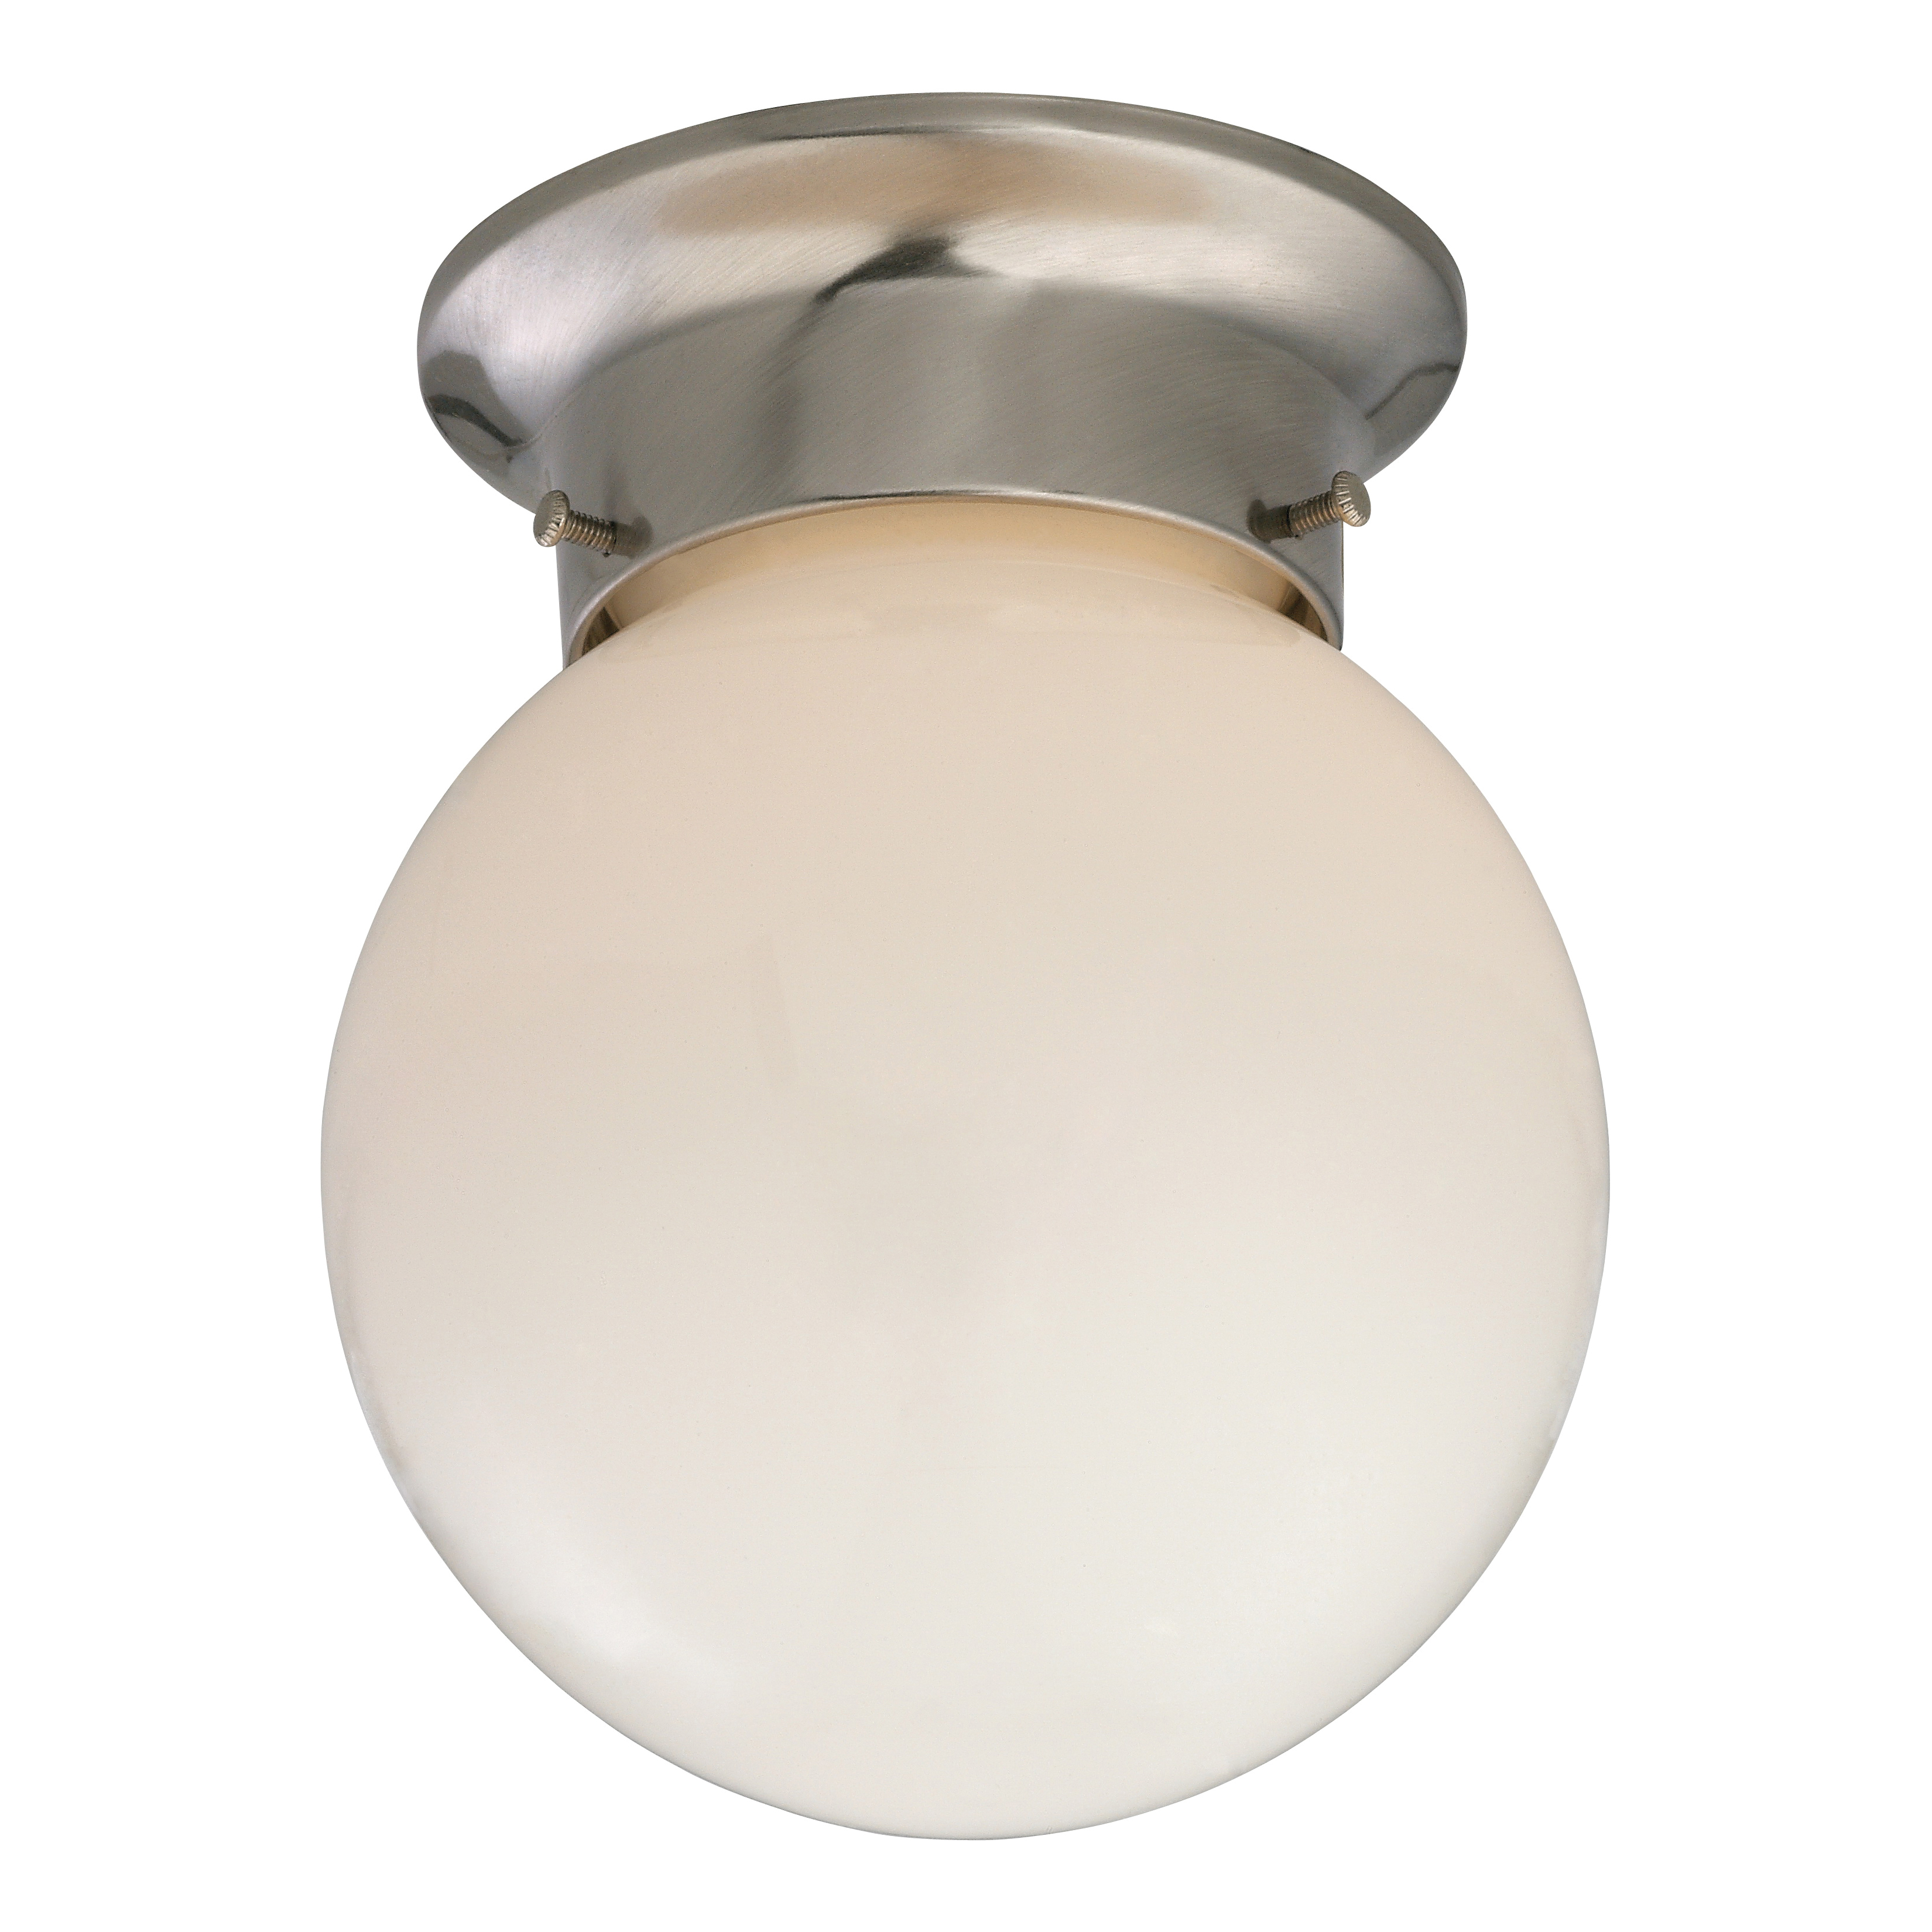 Single Light Ceiling Fixture, 120 V, 60 W, 1-Lamp, A19 or CFL Lamp, Brushed Nickel Fixture